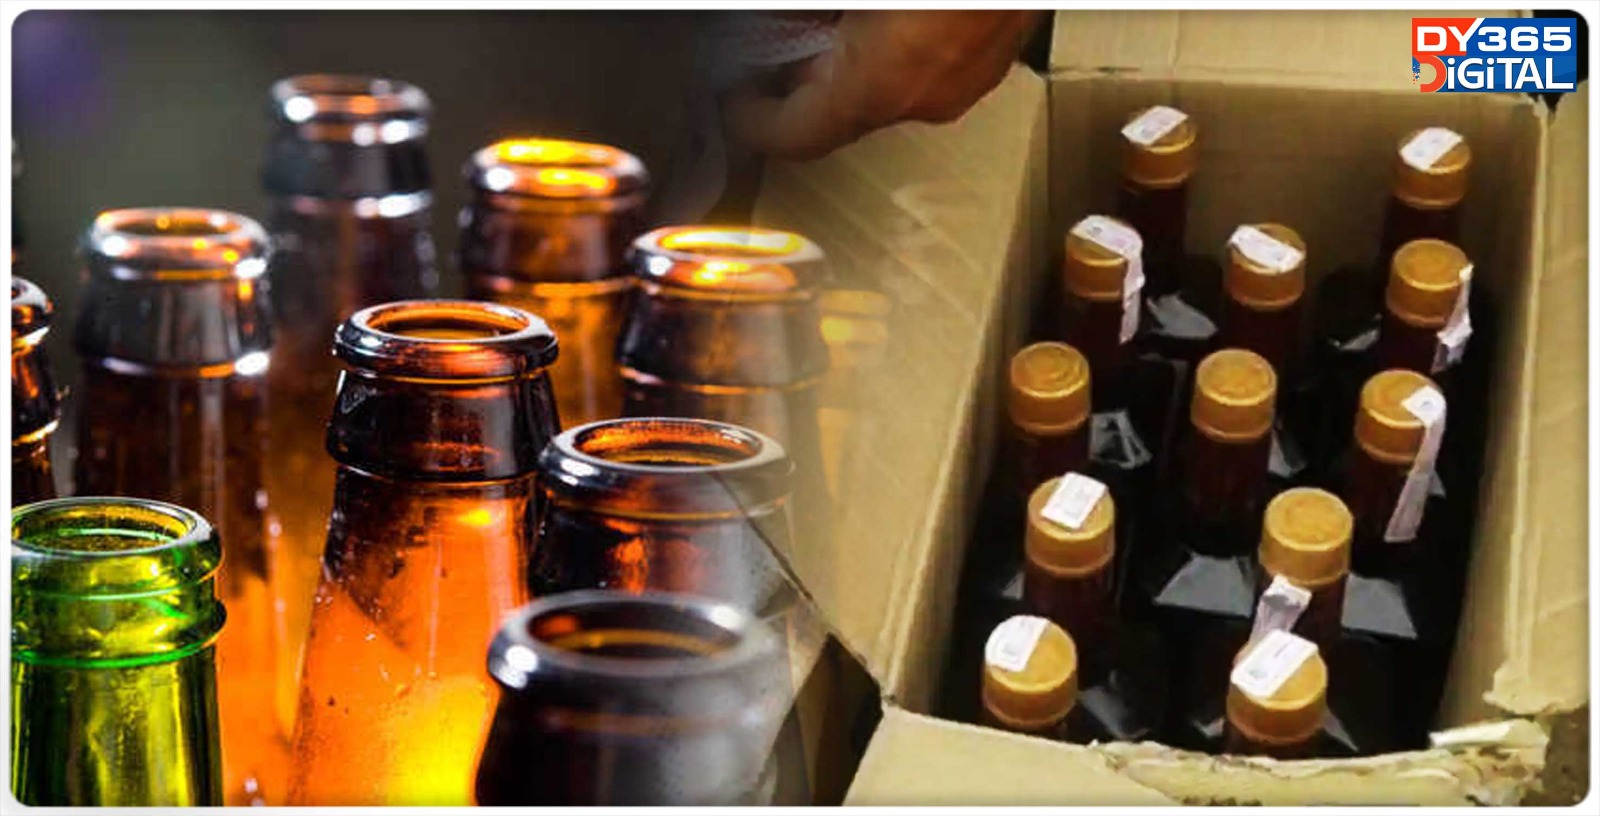 huge-amount-of-illegal-liquor-worth-over-rs-1-lakh-seized-in-biswanath-chariali